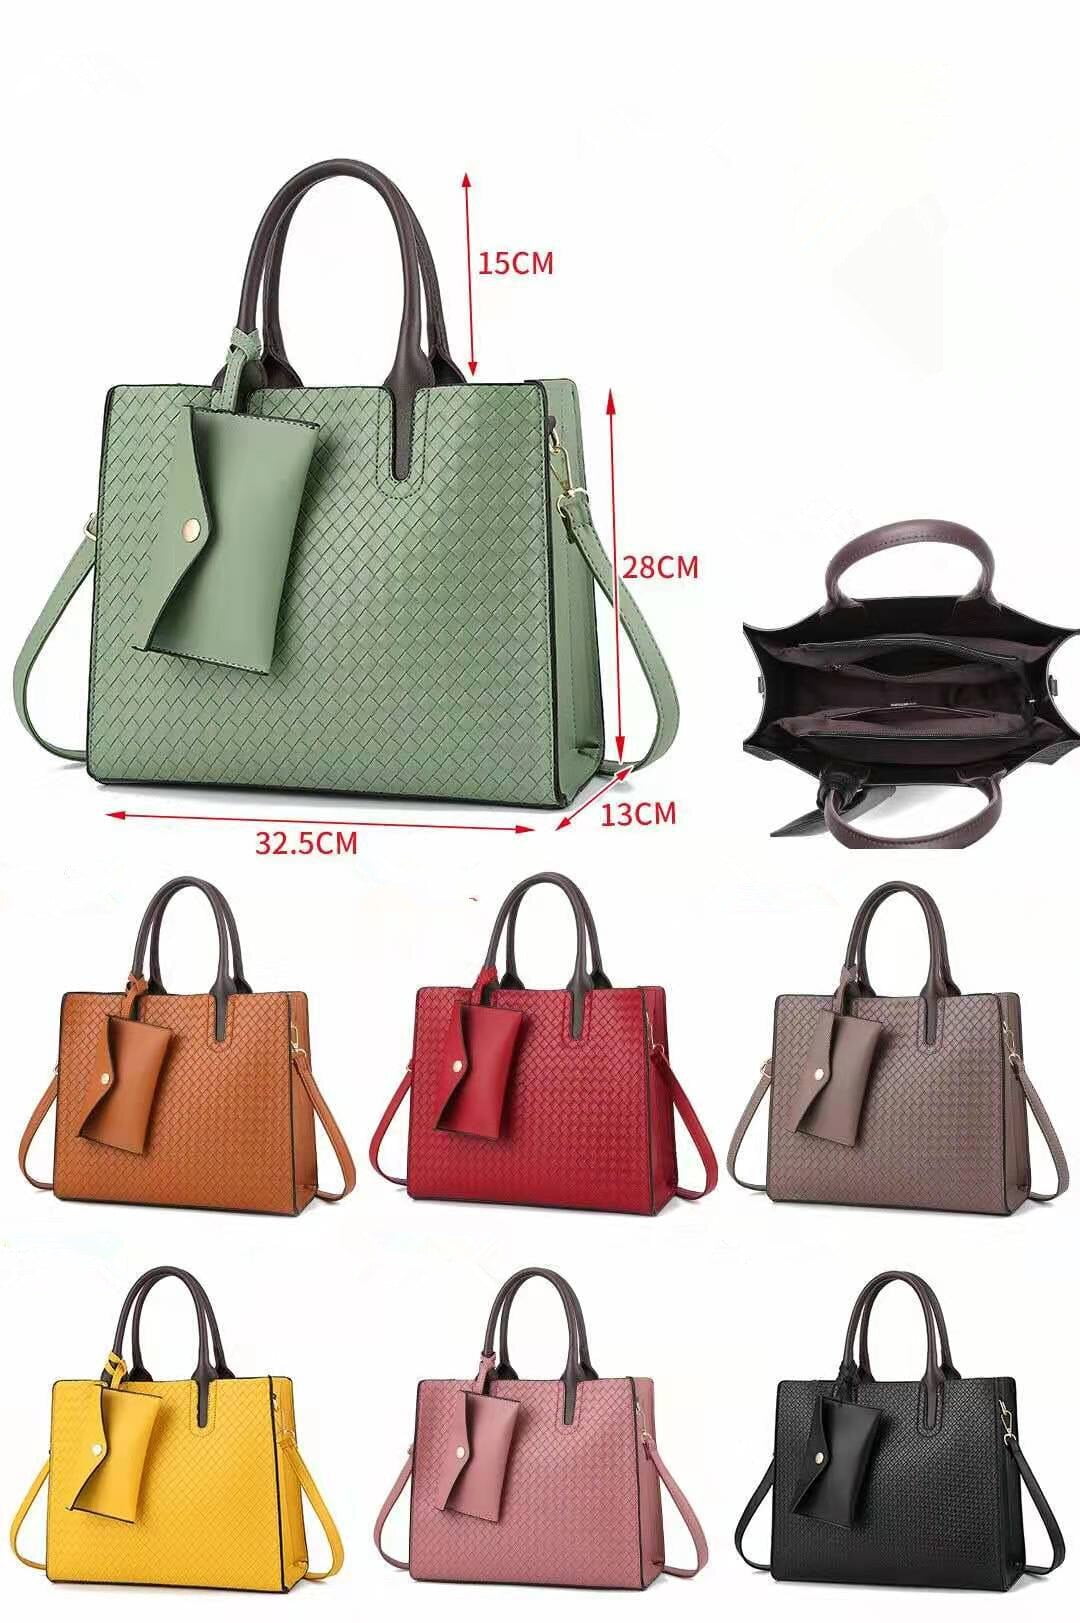 Handbag Types Photos and Images | Shutterstock